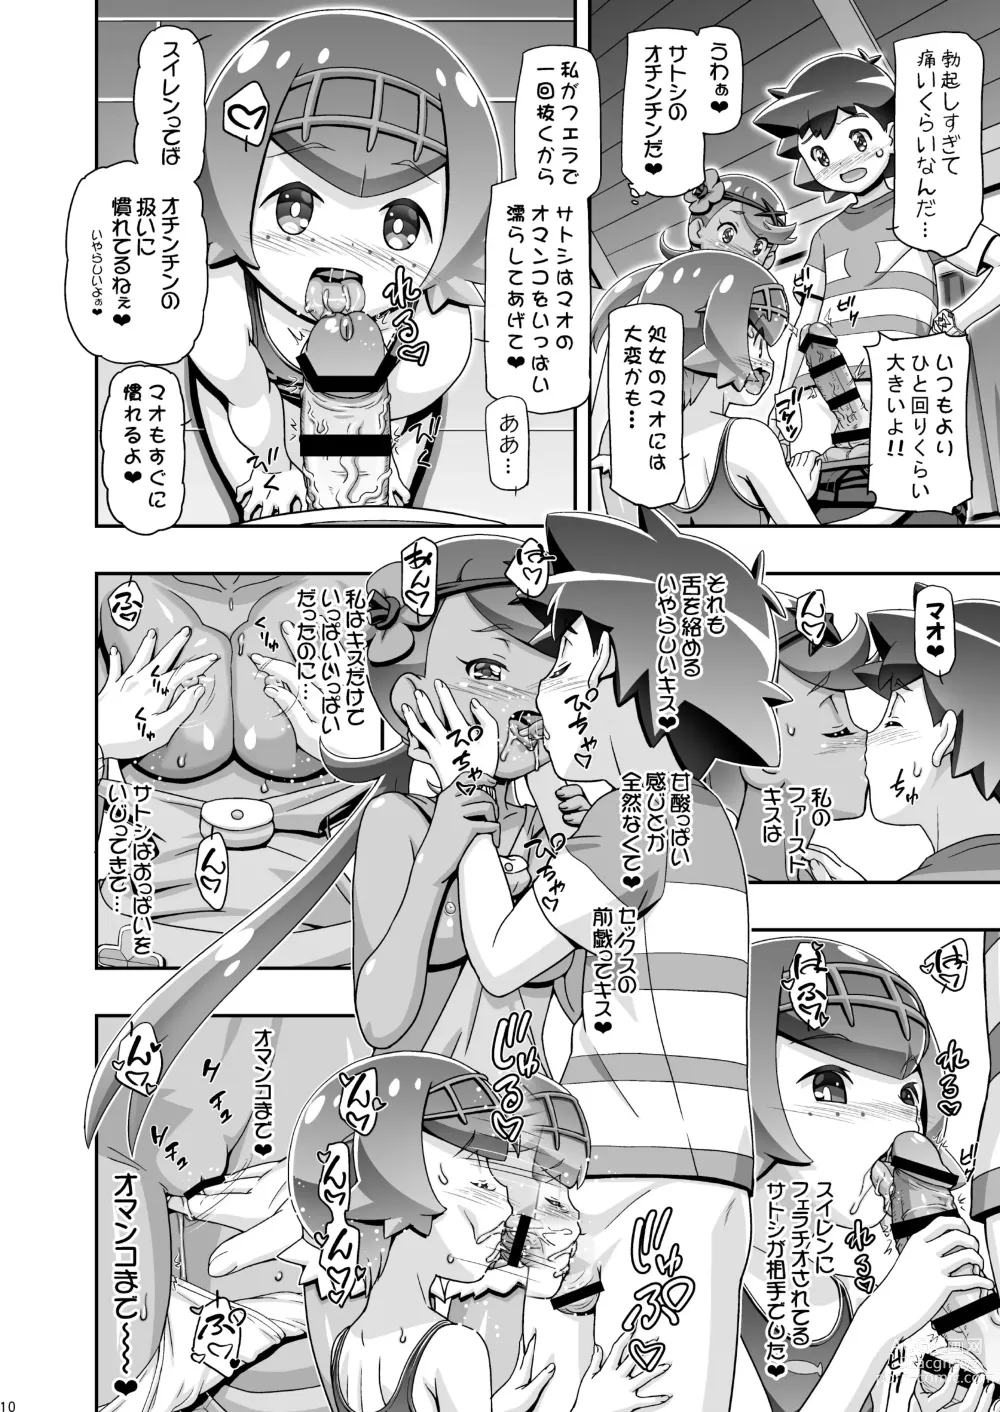 Page 9 of doujinshi PM GALS SUNMOON MALLOW